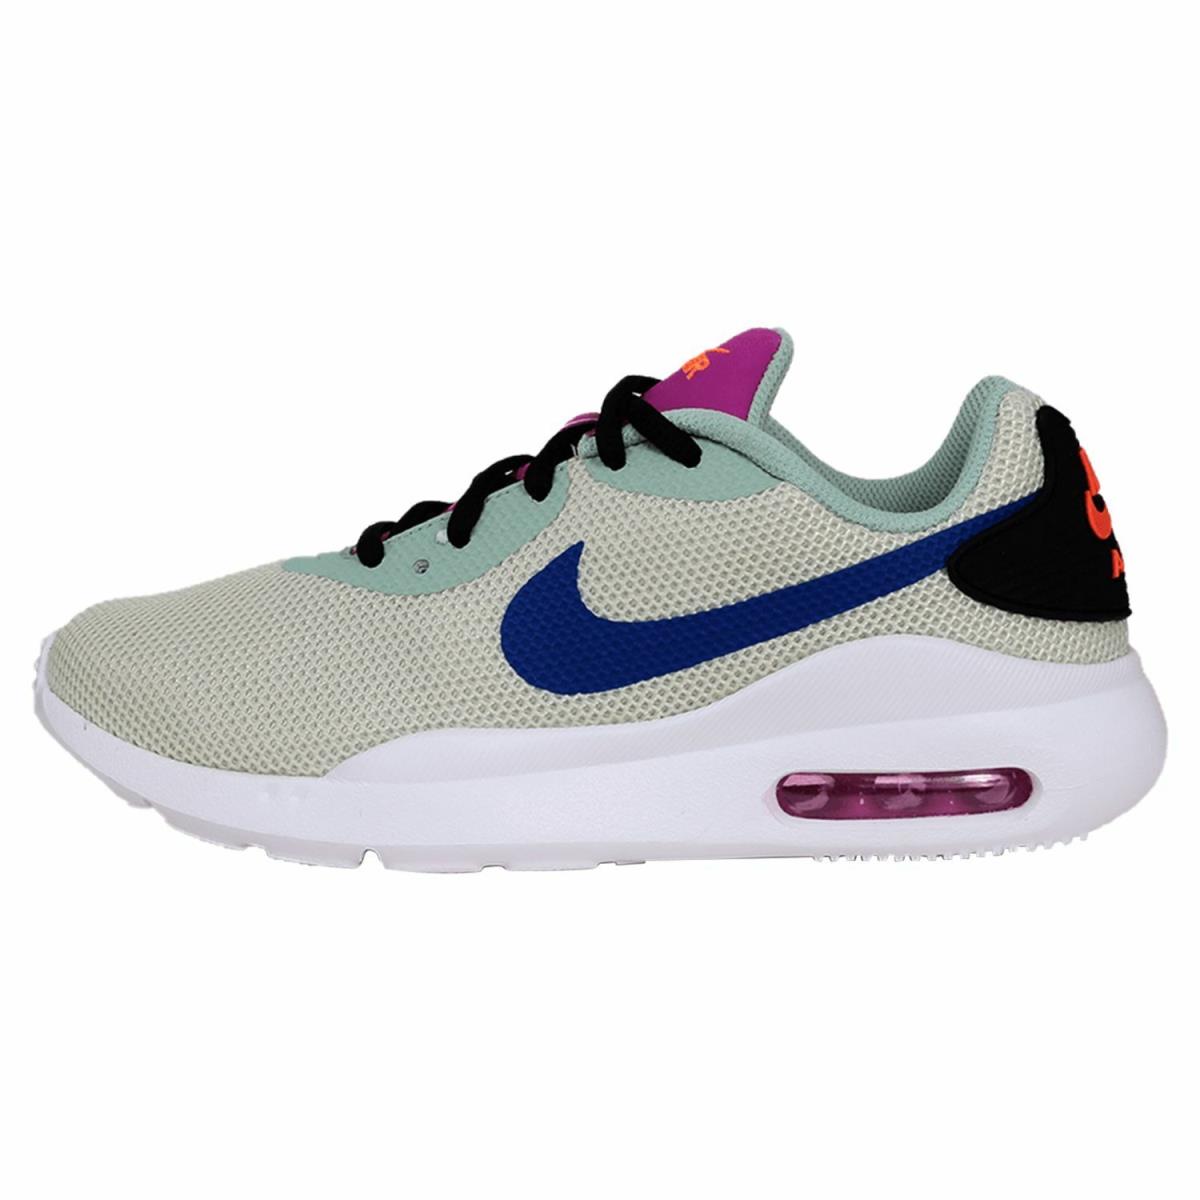 Nike Air Max Oketo ES1 Womens CD5448-200 Fossil Blue Fire Pink Shoes Size 7